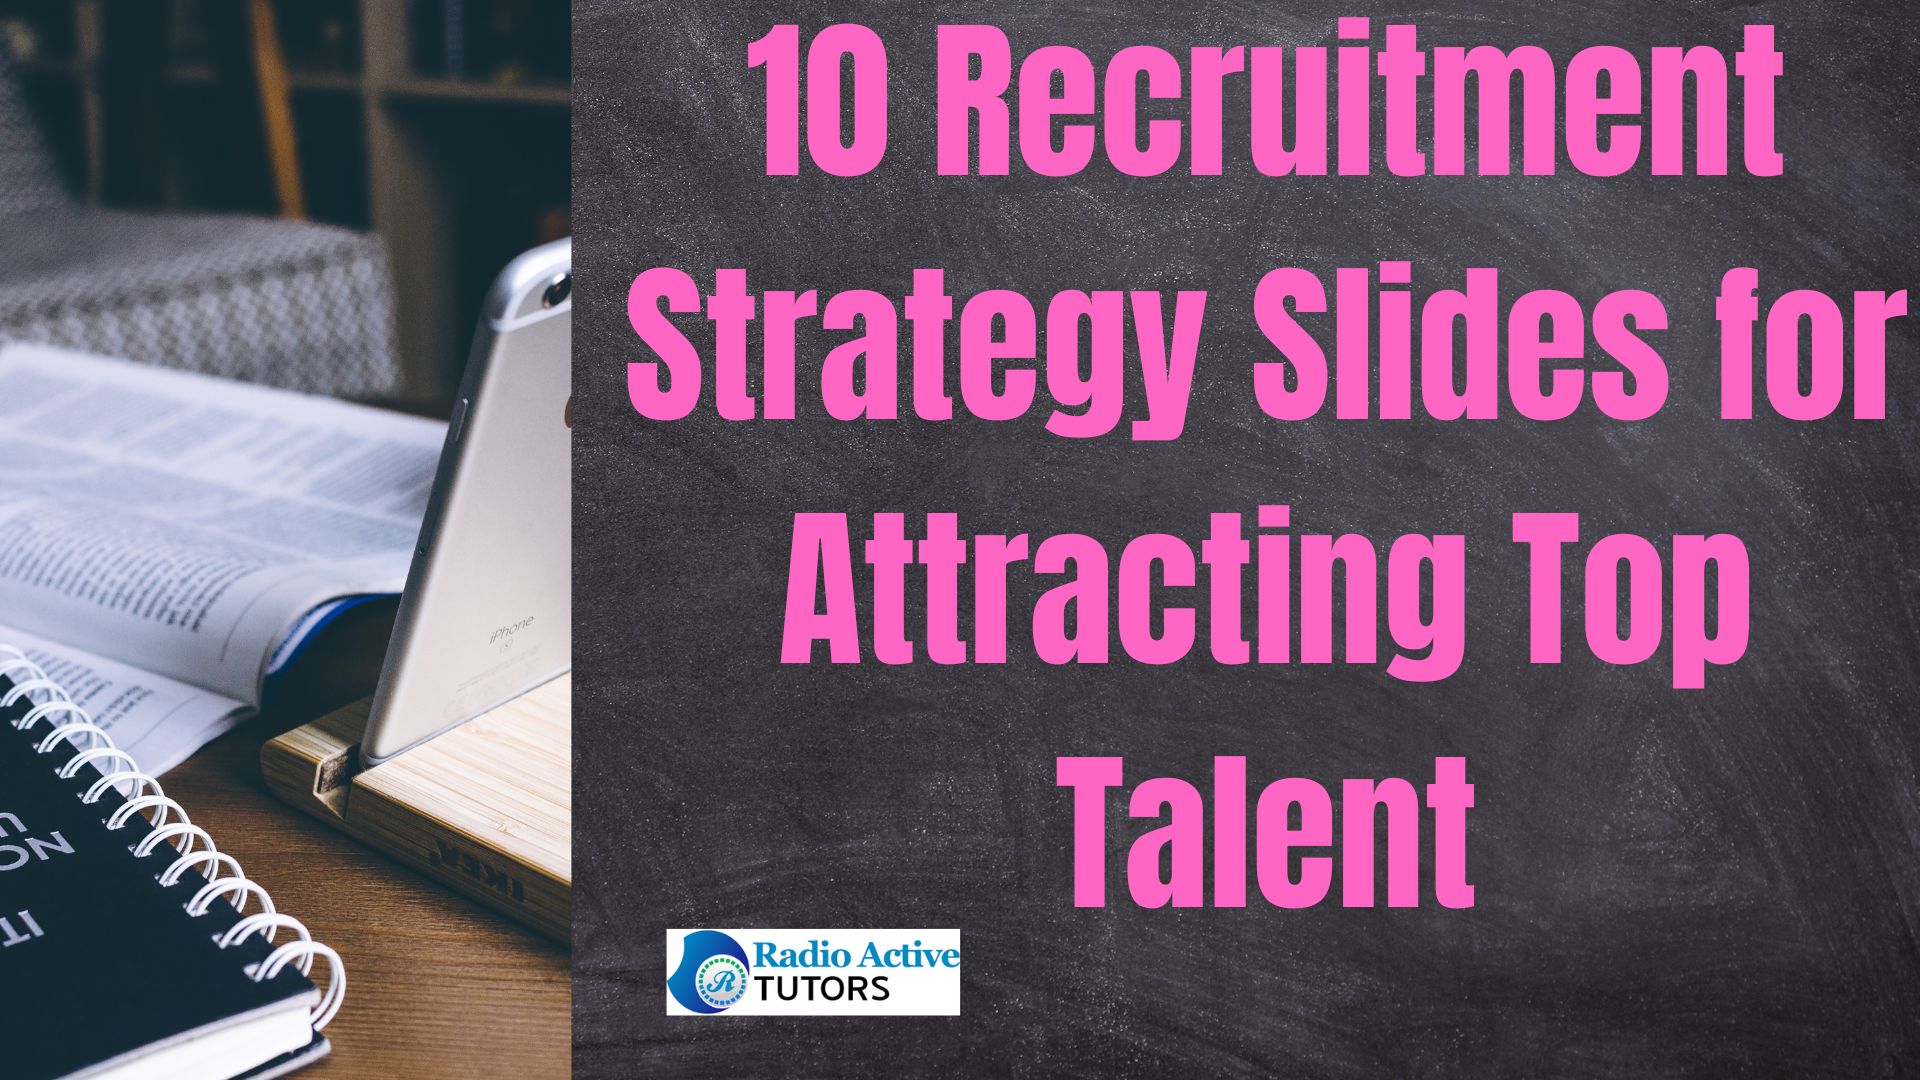 10 Recruitment Strategy Slides for Attracting Top Talent